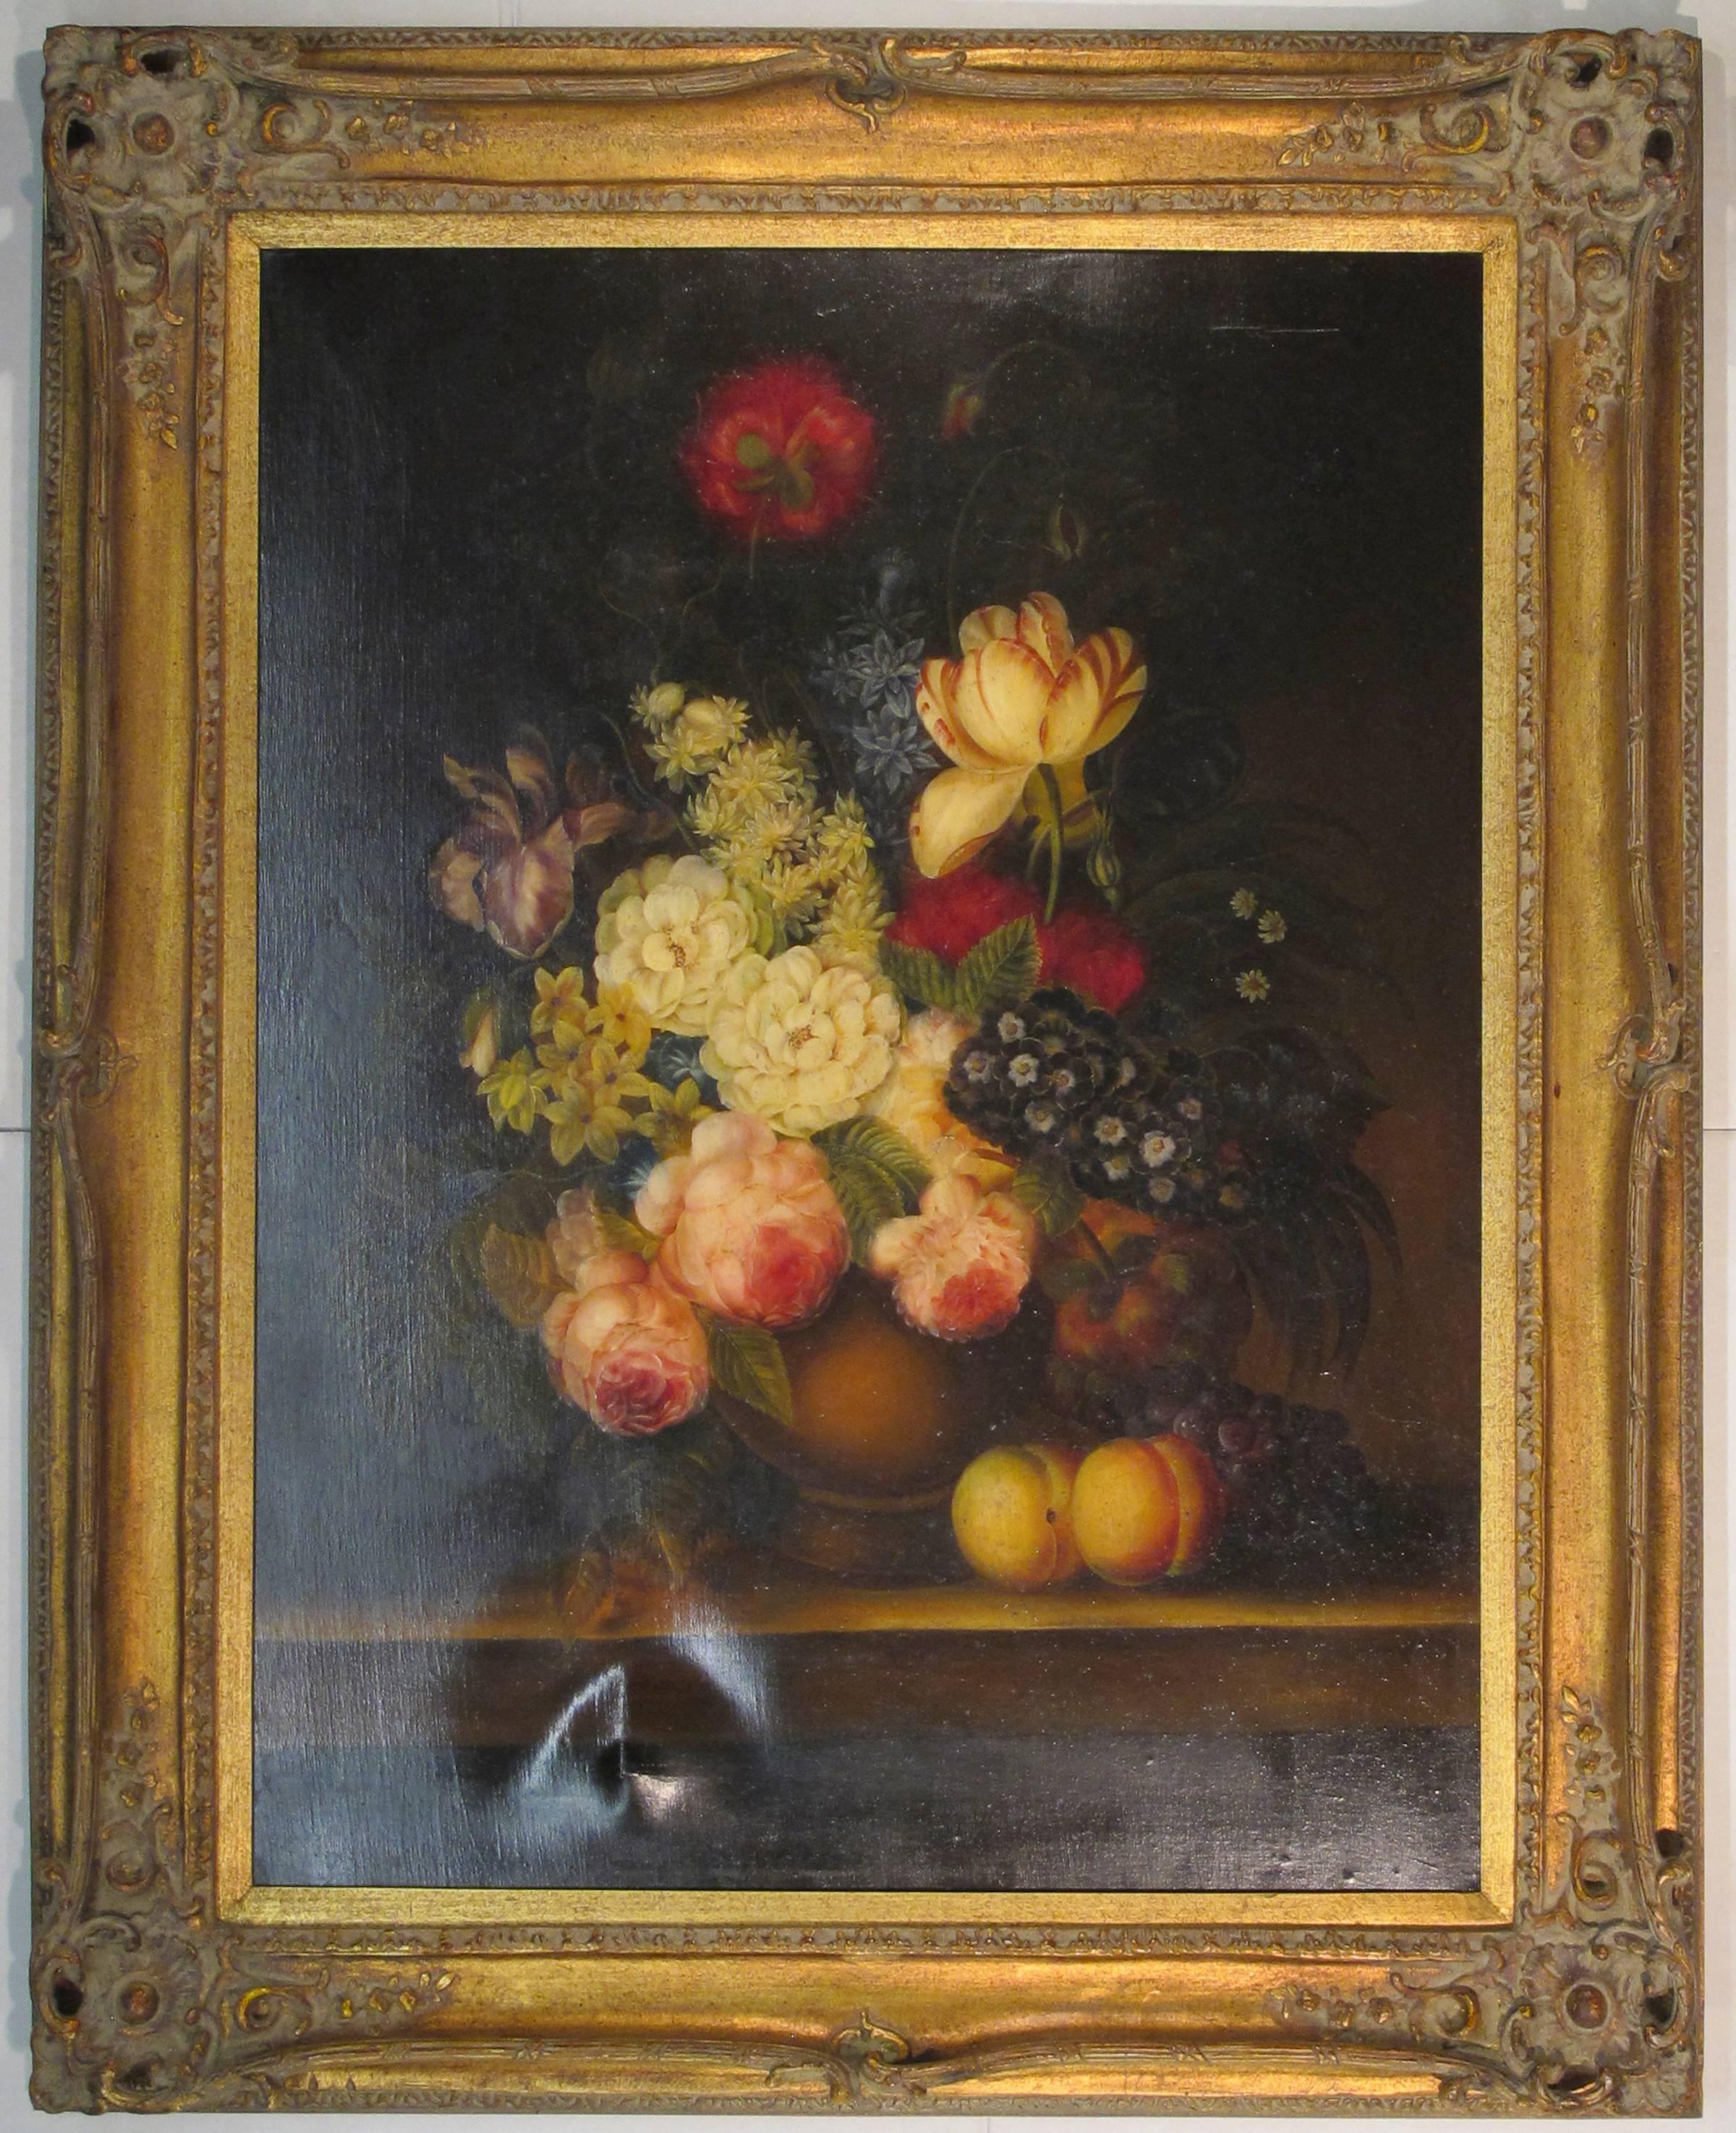 Unknown Still-Life Painting - Still Life with Flowers and Fruit on a Table, French school